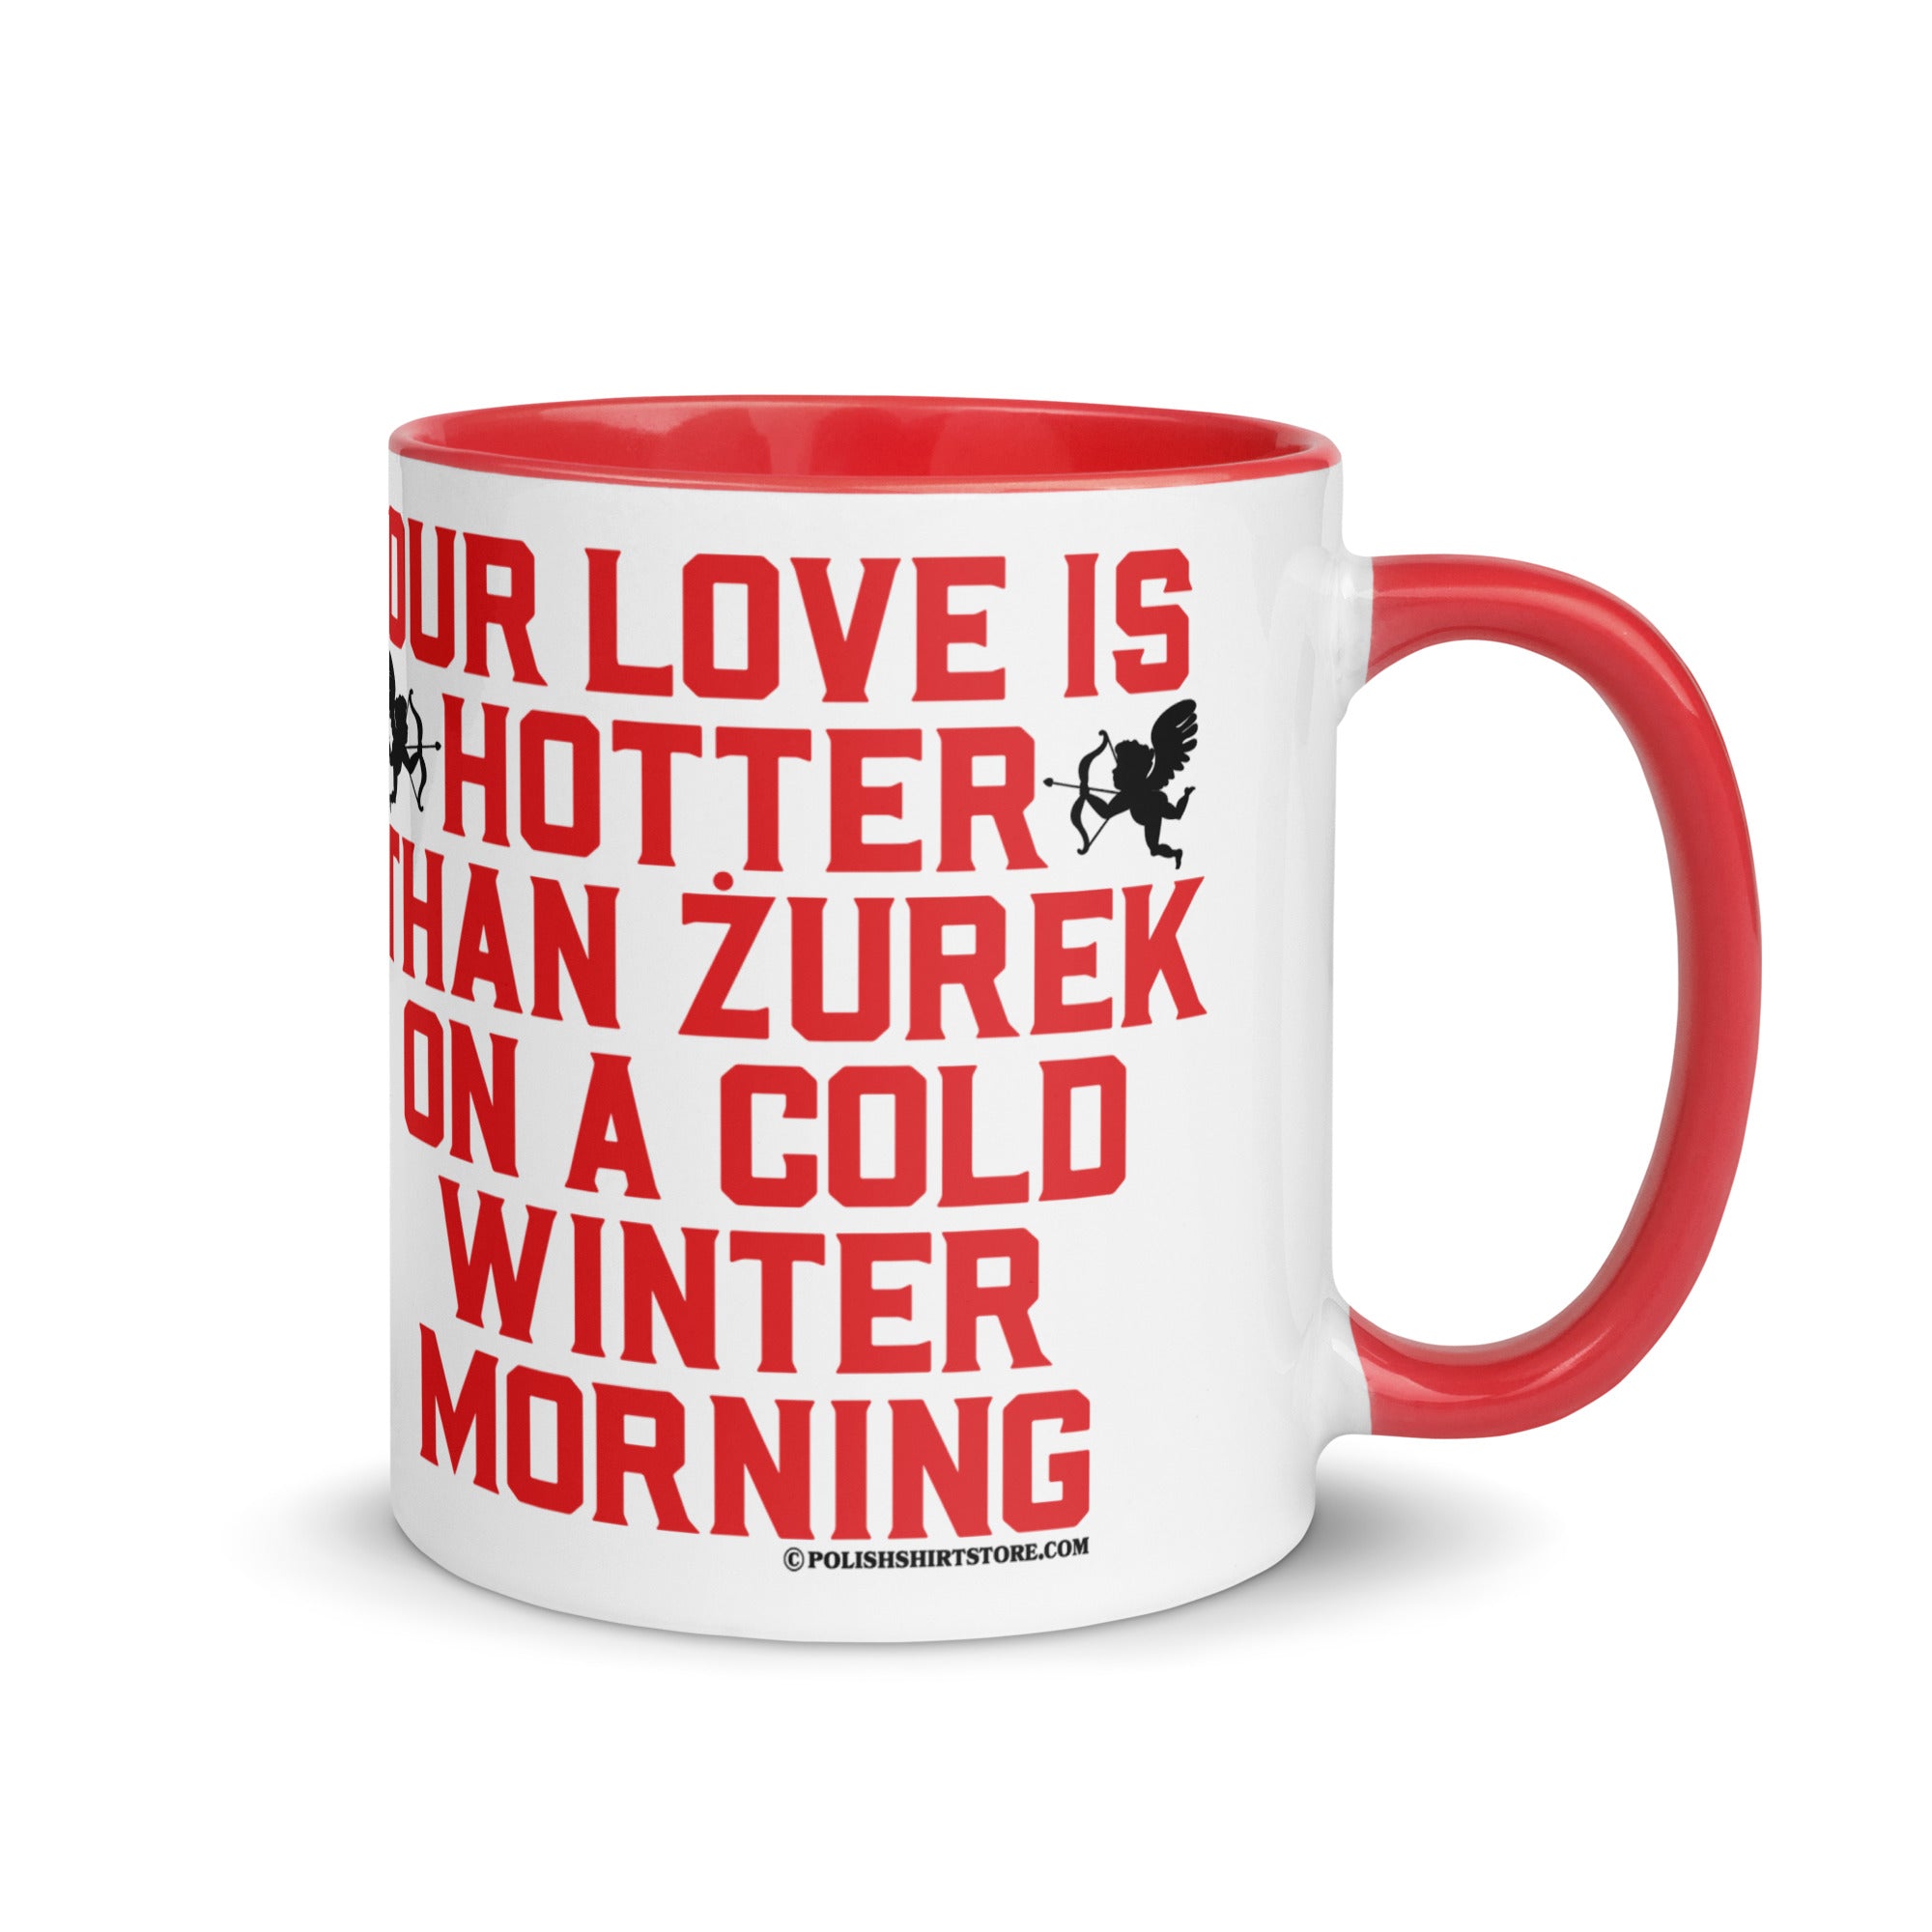 Our Love Is Hotter Than Zurek On A Cold Winter Morning Coffee Mug with Color Inside  Polish Shirt Store Red 11 oz 